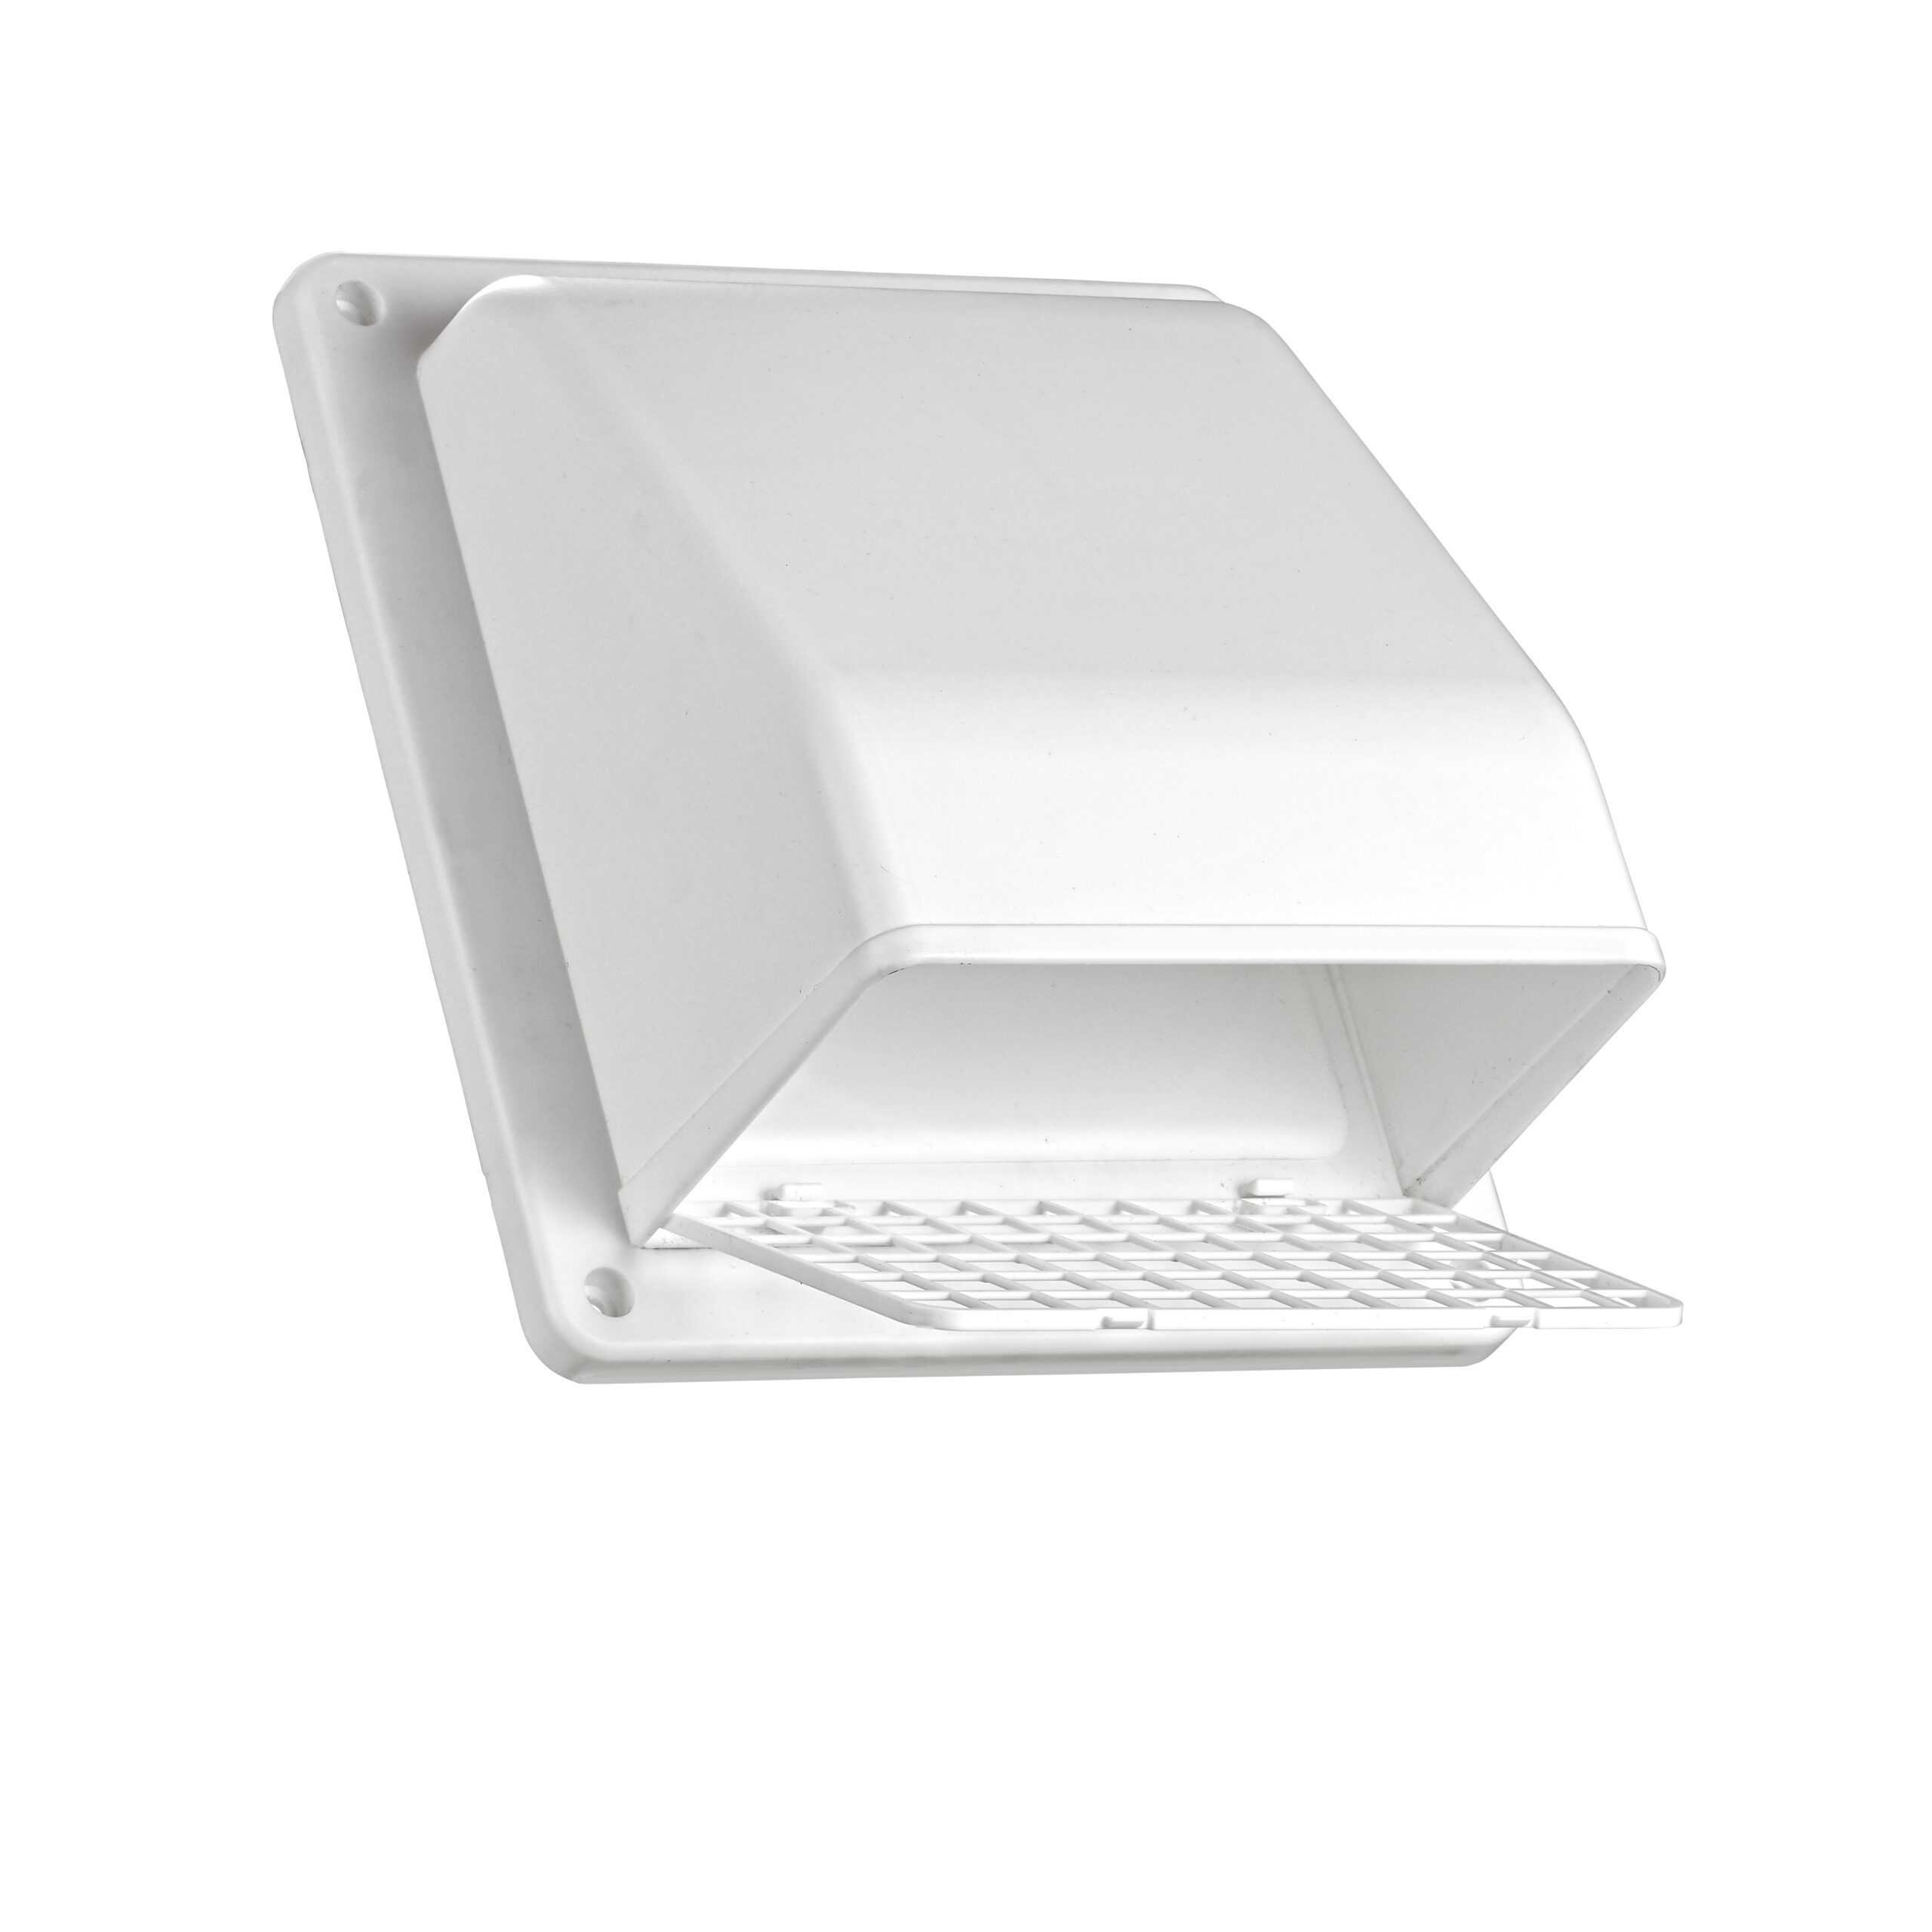 6 inch White Plastic Wall Exhaust or Air Intake Vent - Hinged Screen ...